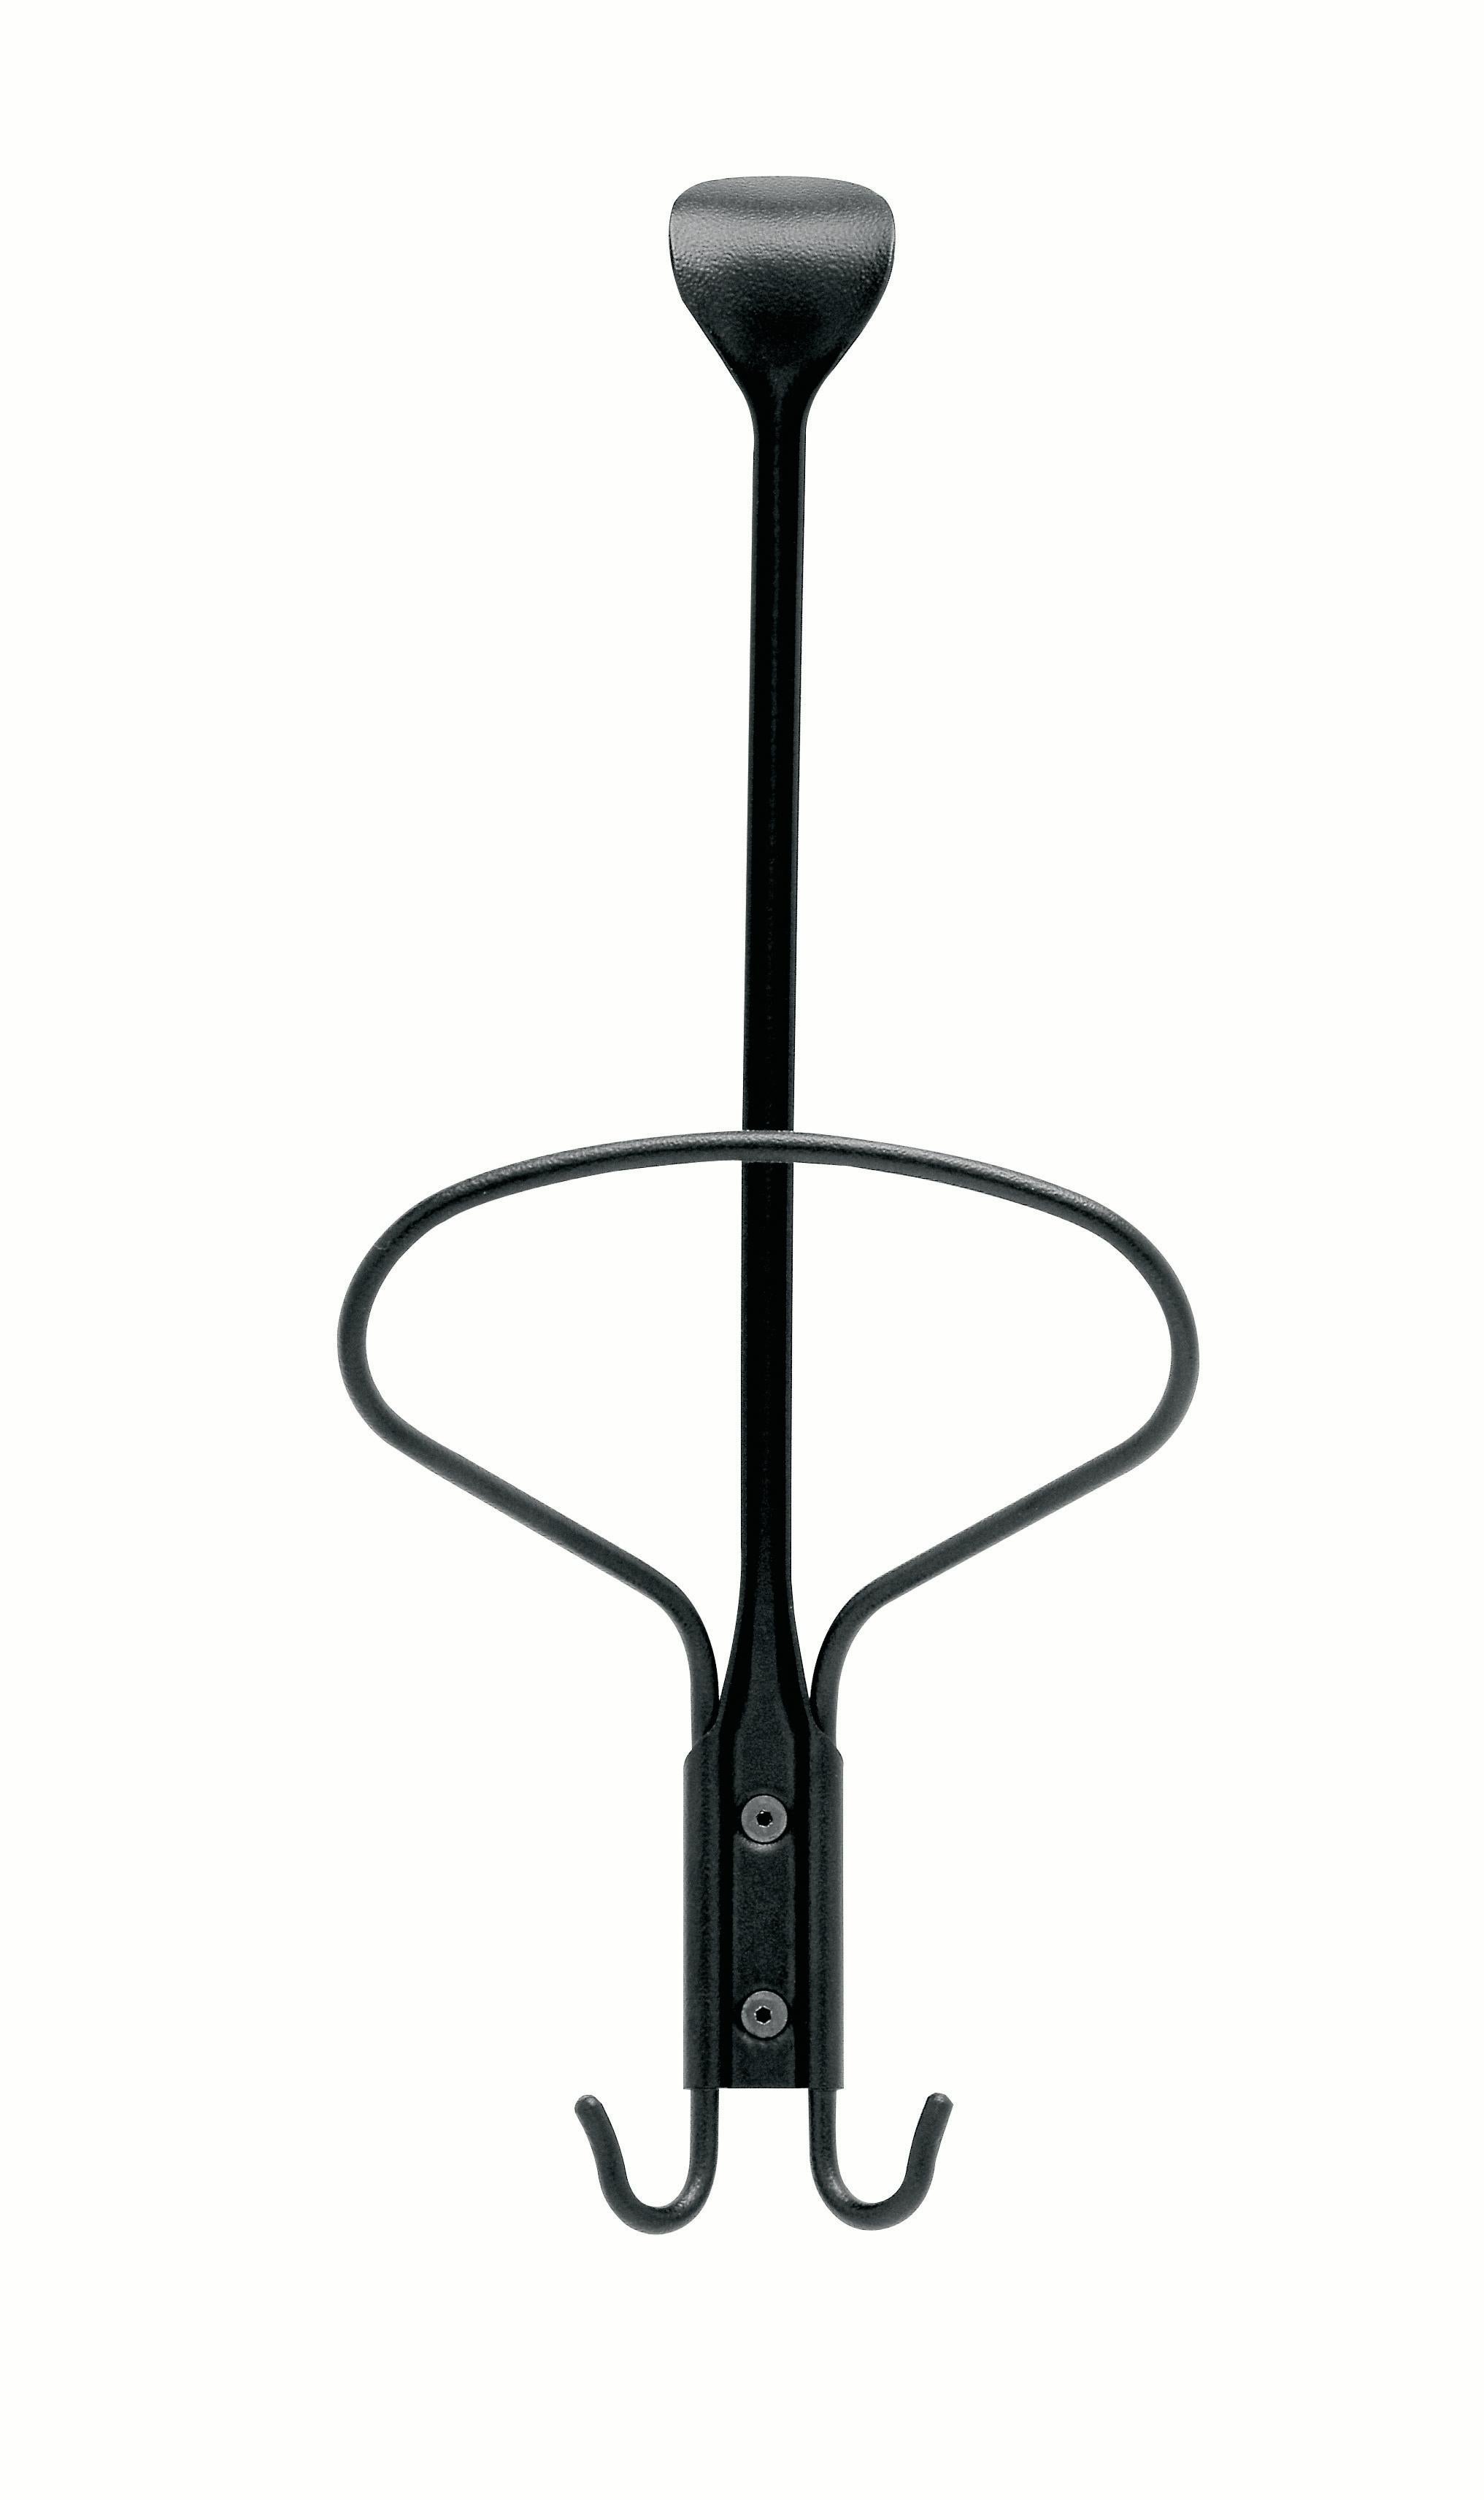 Zanotta Museo Coat Hanger in Black Painted Steel with Scratch-Resistant Finish by Enzo Mari

Wall-mounted coat hanger single steel element, painted black or white with scratch- resistant finish. Available in black or white. The hat rack is sold in